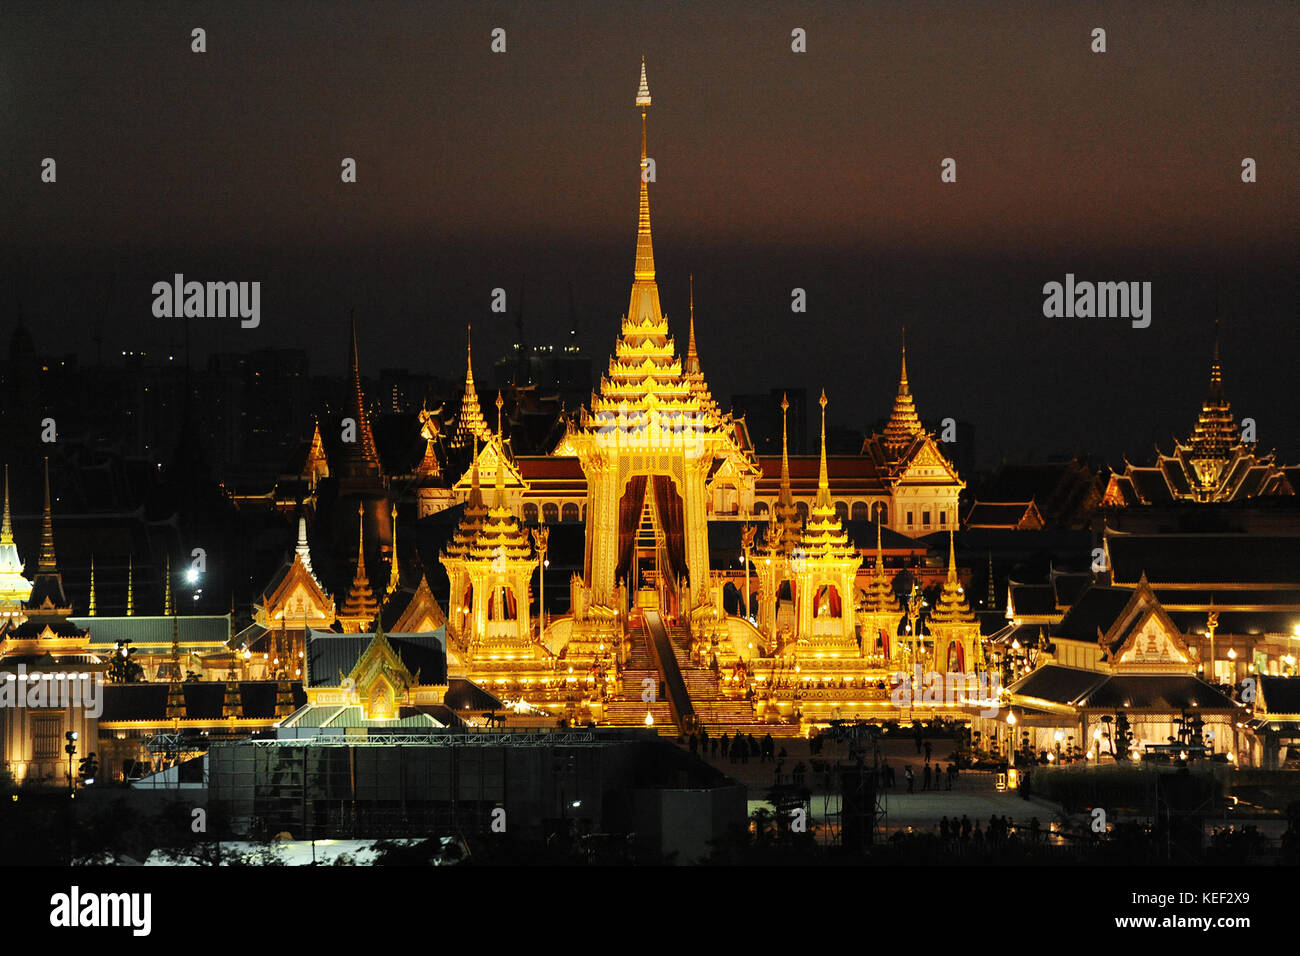 Bangkok. 20th Oct, 2017. This photo taken on Oct. 20, 2017 shows a general night view of the royal crematorium for the late Thai King Bhumibol Adulyadej in Bangkok, Thailand. The late king's cremation ceremony will be held from Oct. 25 till Oct. 29 with the cremation scheduled for Oct. 26. Credit: Rachen Sageamsak/Xinhua/Alamy Live News Stock Photo